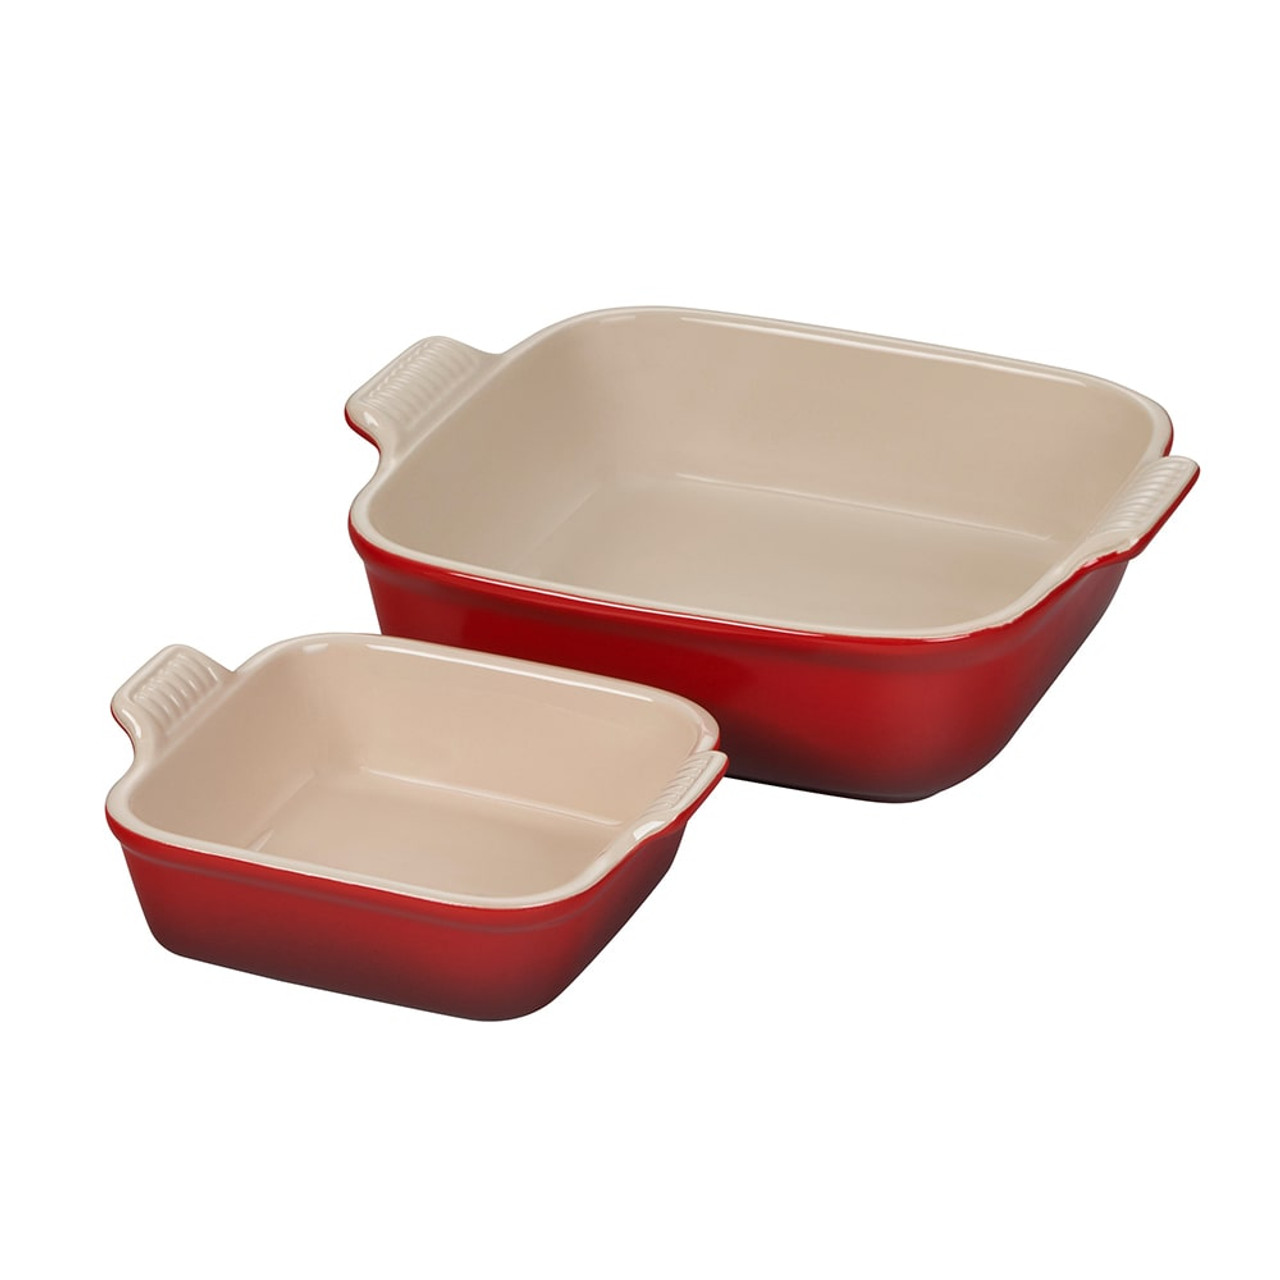 https://cdn11.bigcommerce.com/s-hccytny0od/images/stencil/1280x1280/products/3435/12347/le-creuset-heritage-square-baking-dish-set-cerise__32768.1596497917.jpg?c=2?imbypass=on